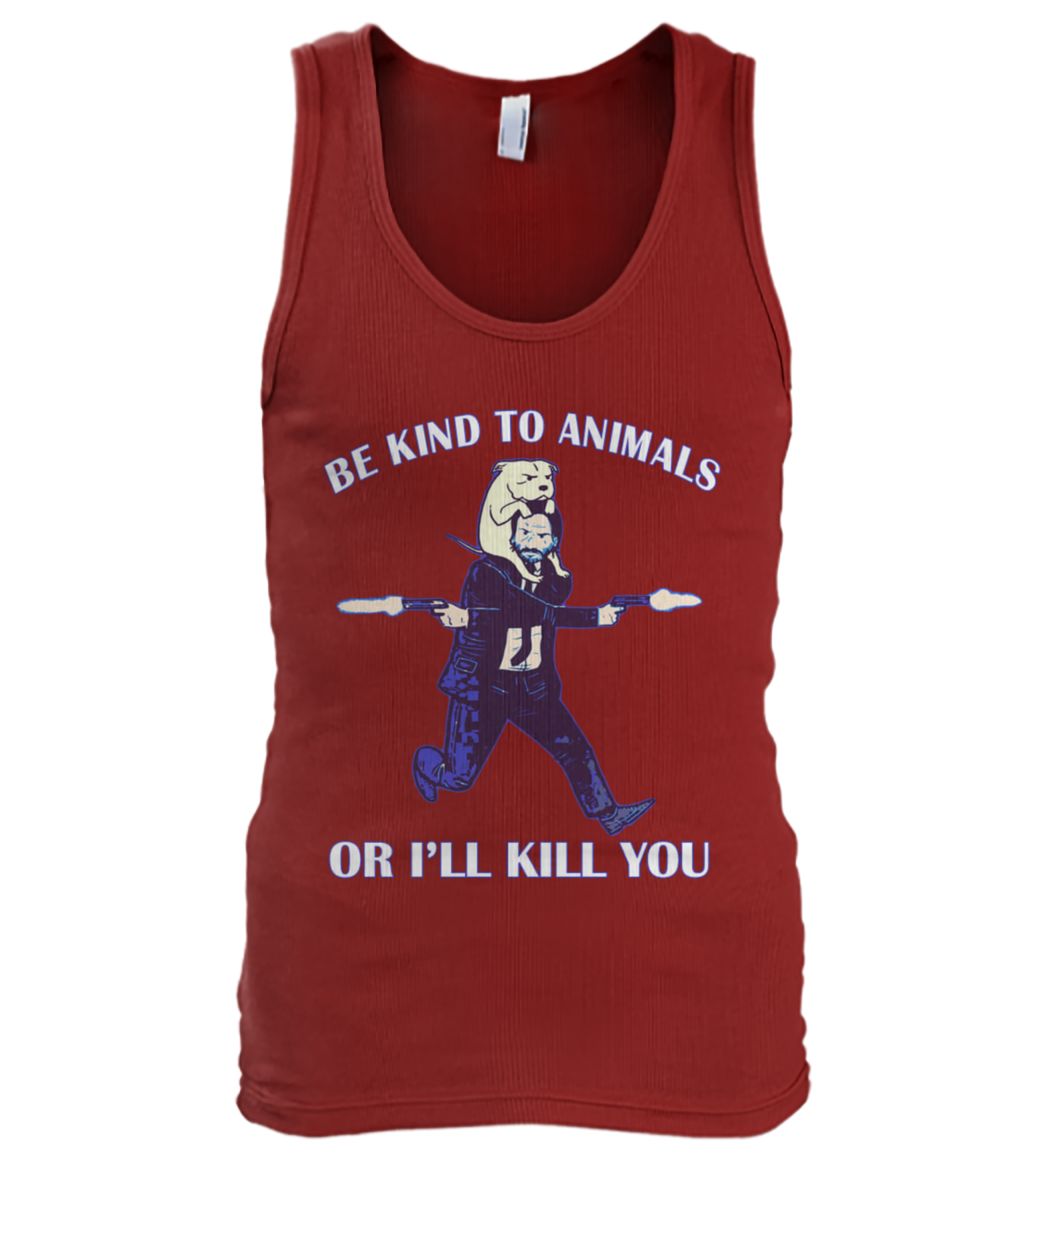 John wick be kind to animals or I'll kill you men's tank top